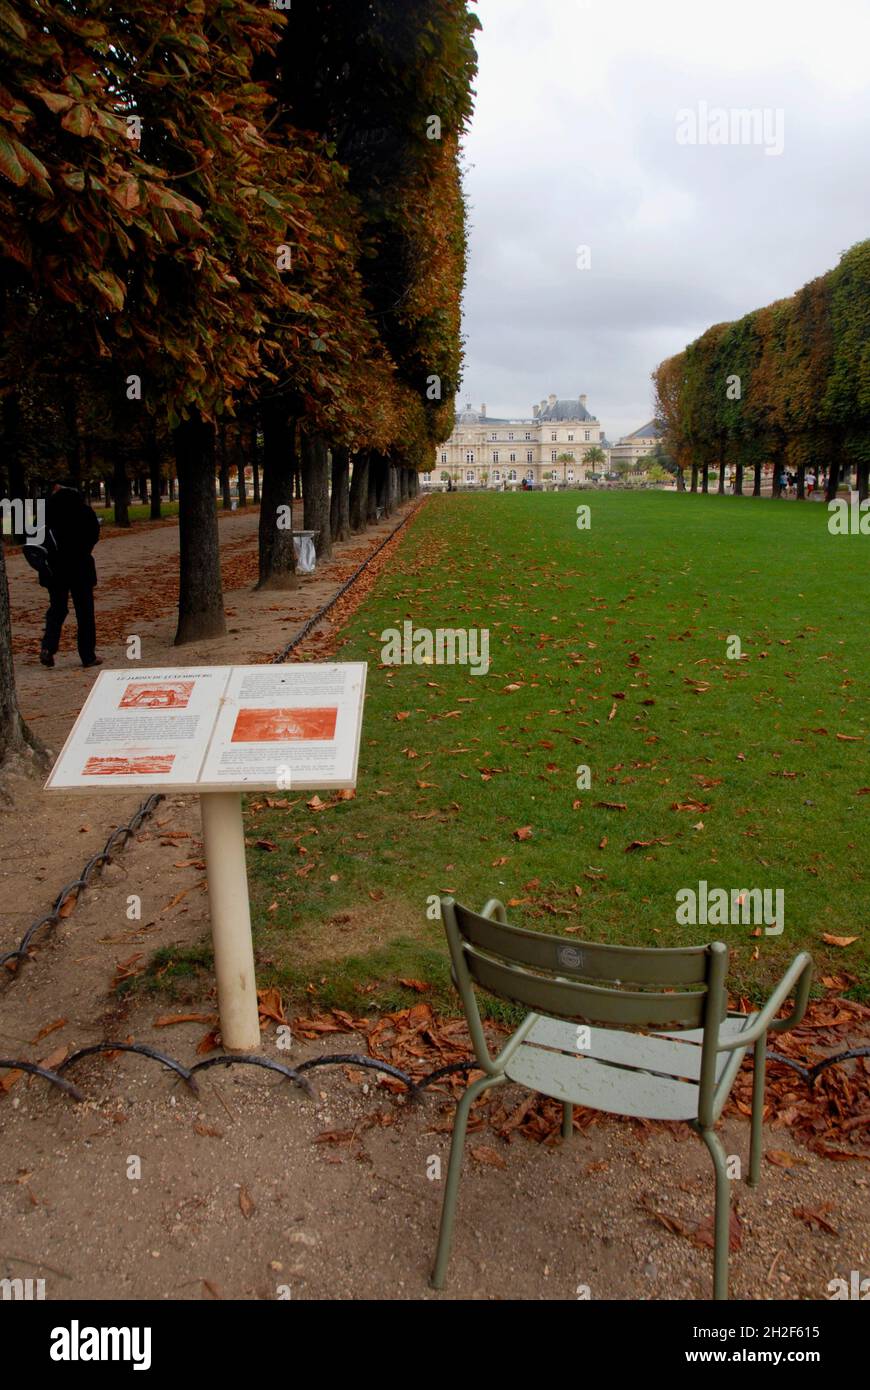 Le Jardin du Luxembourg, Paris, France with seat and guide notice and avenues of trees Stock Photo